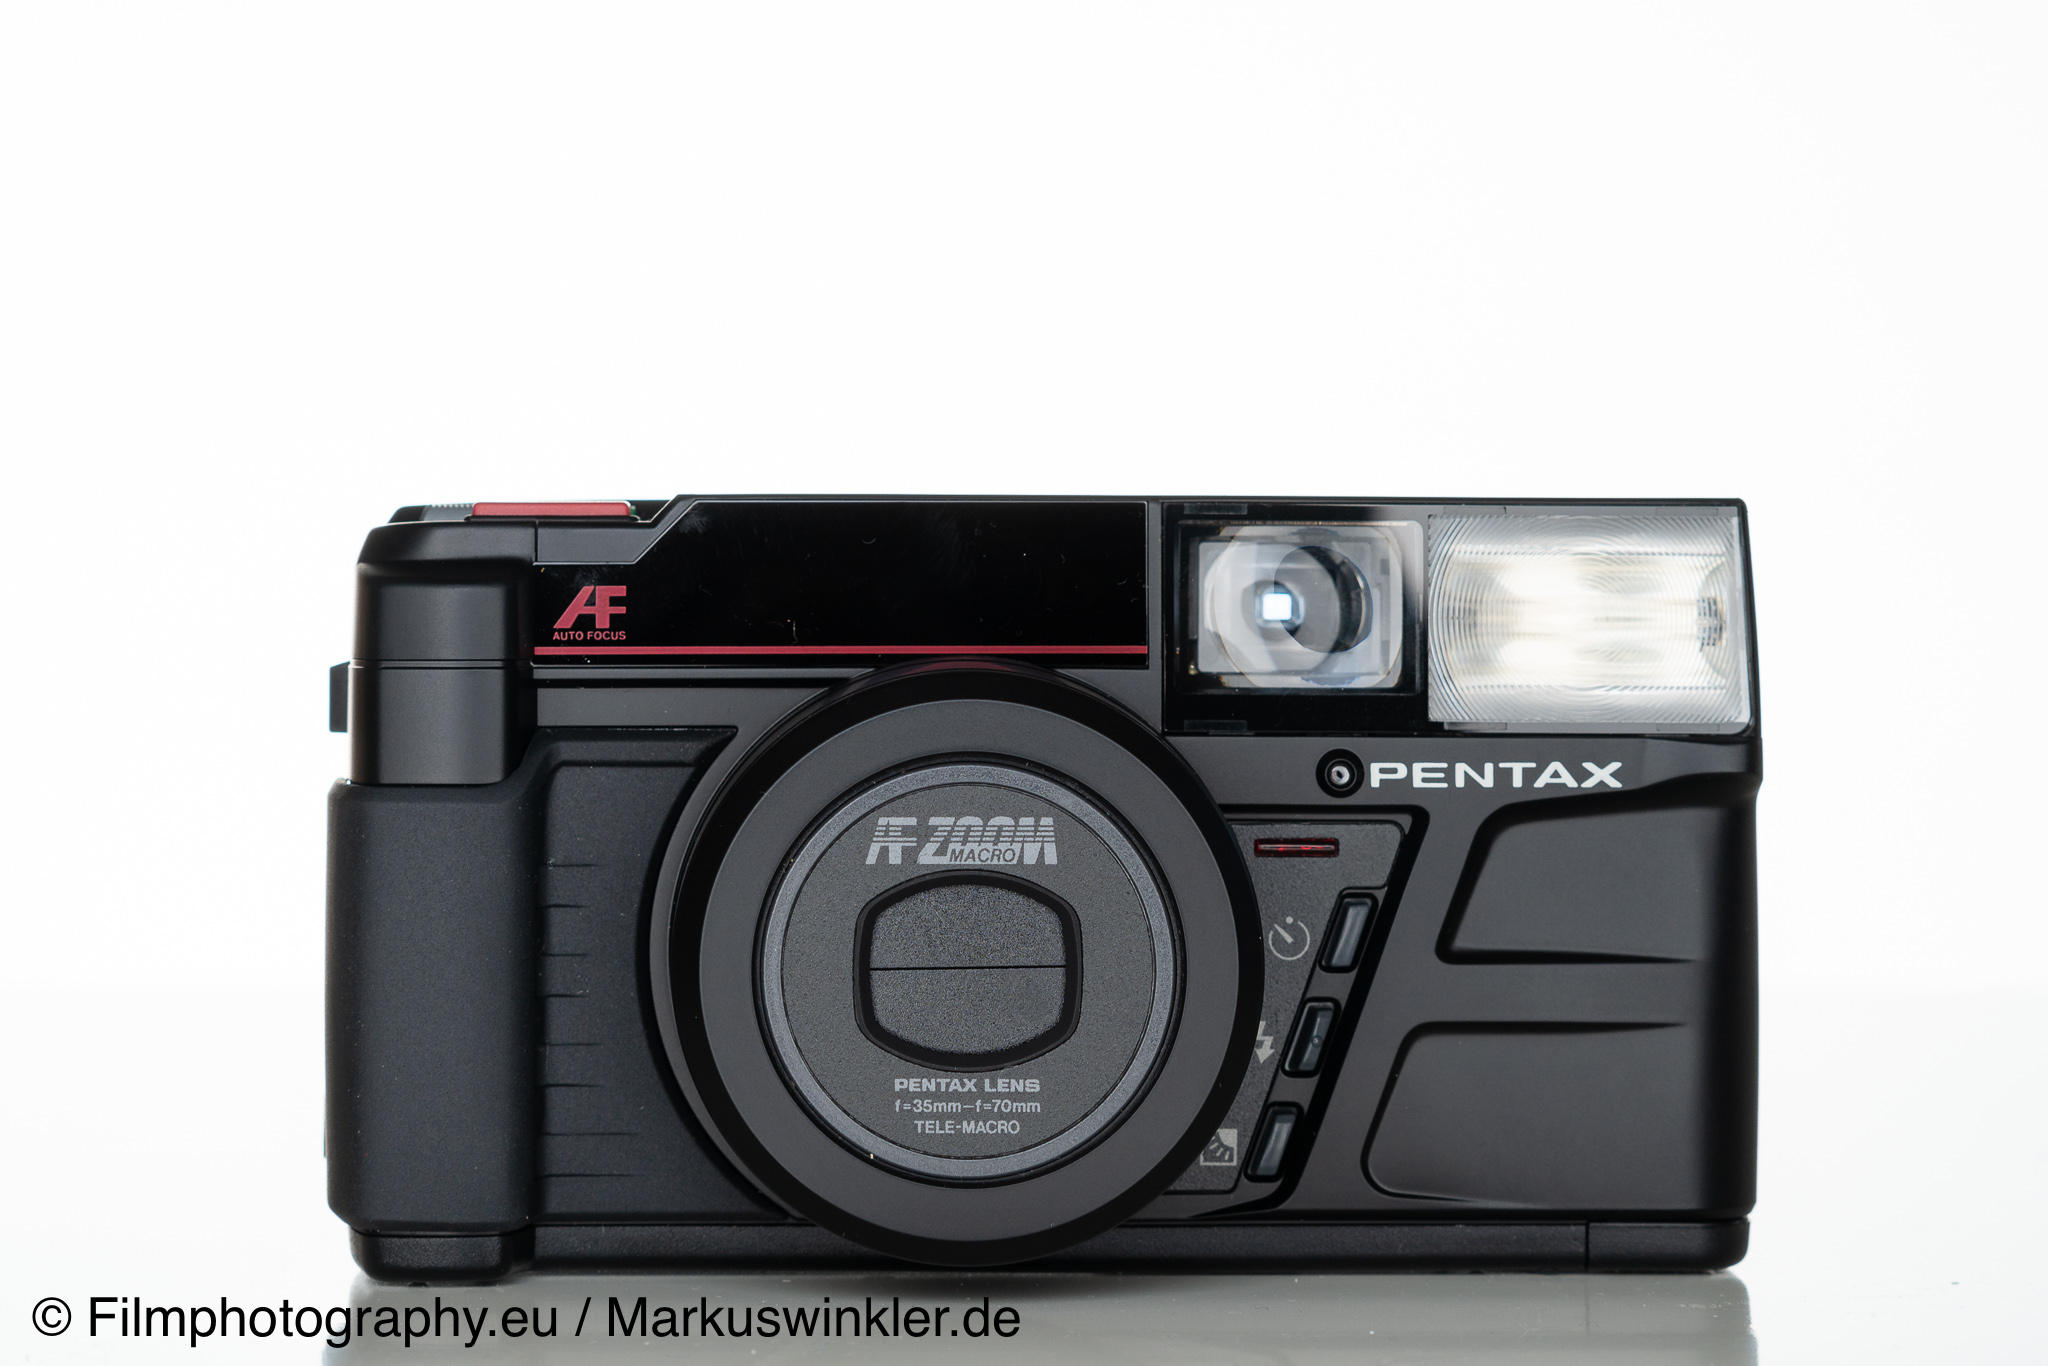 Pentax Zoom 70 - Information about functions, battery & films